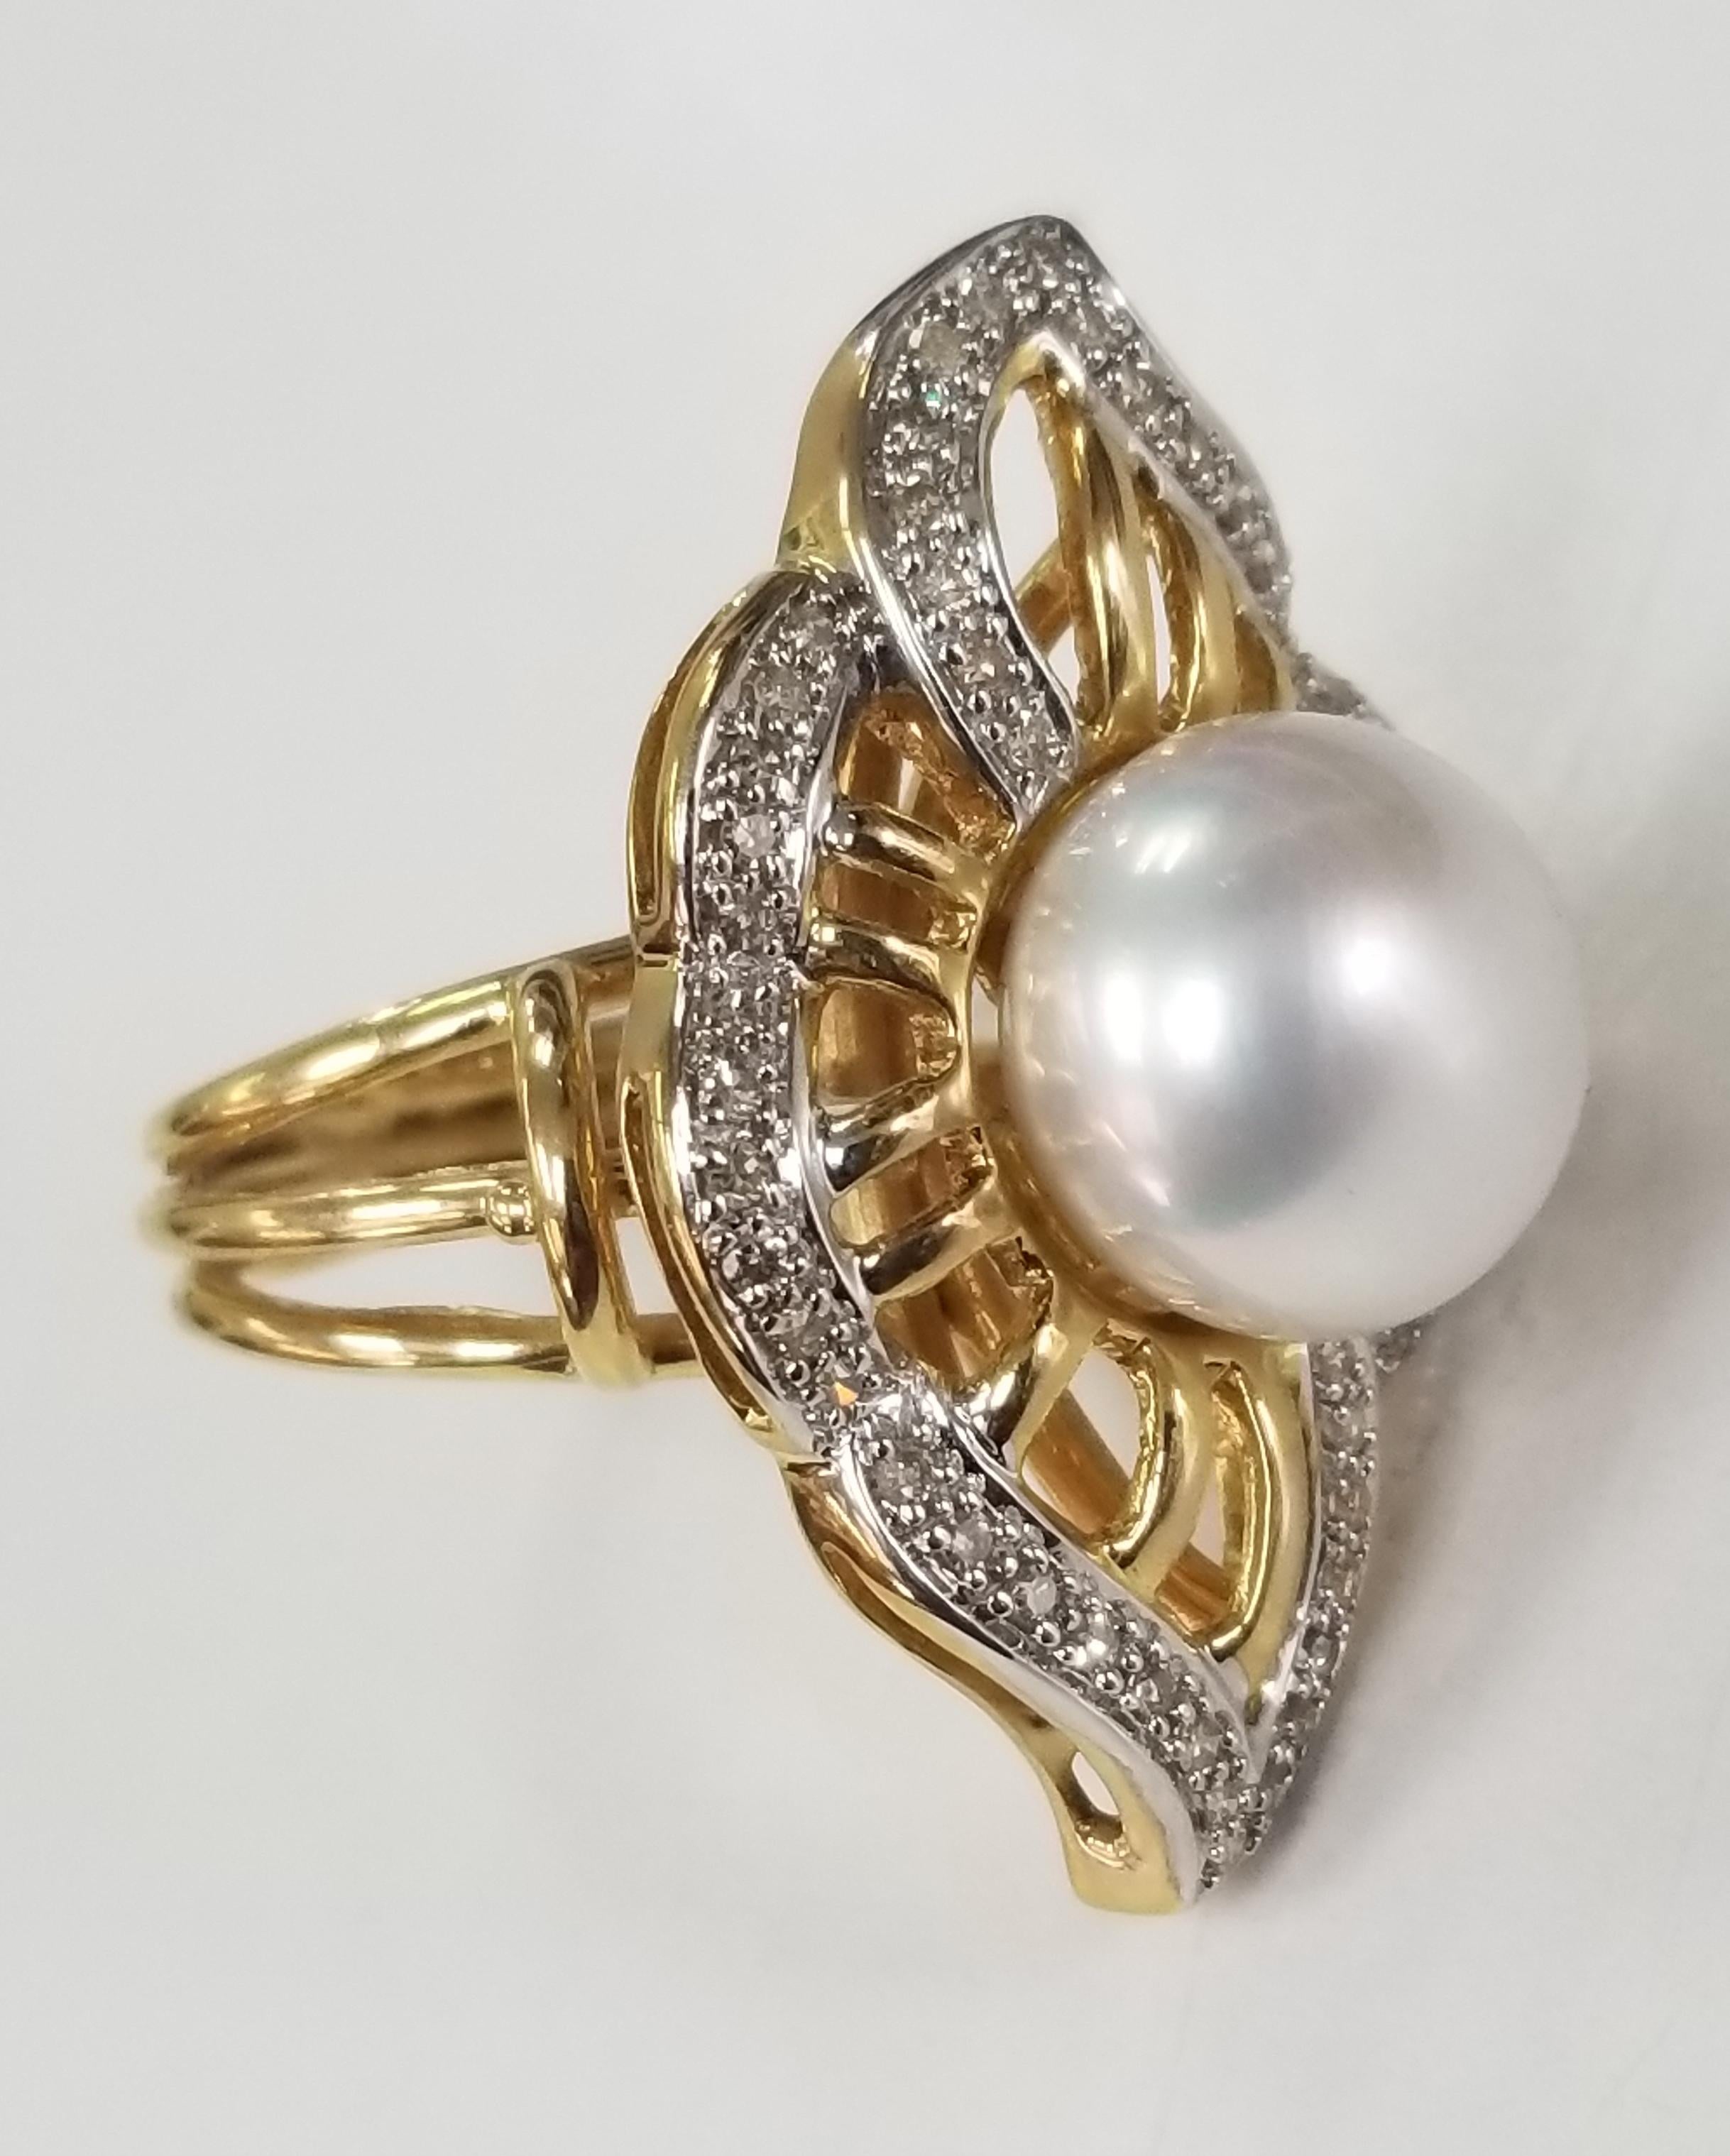 14 karat yellow gold 11.5mm South Sea Pearl and diamond ring, containing 52 single cut diamonds weighing .50pts.   This ring is a size 7 but we will size to fit for free.